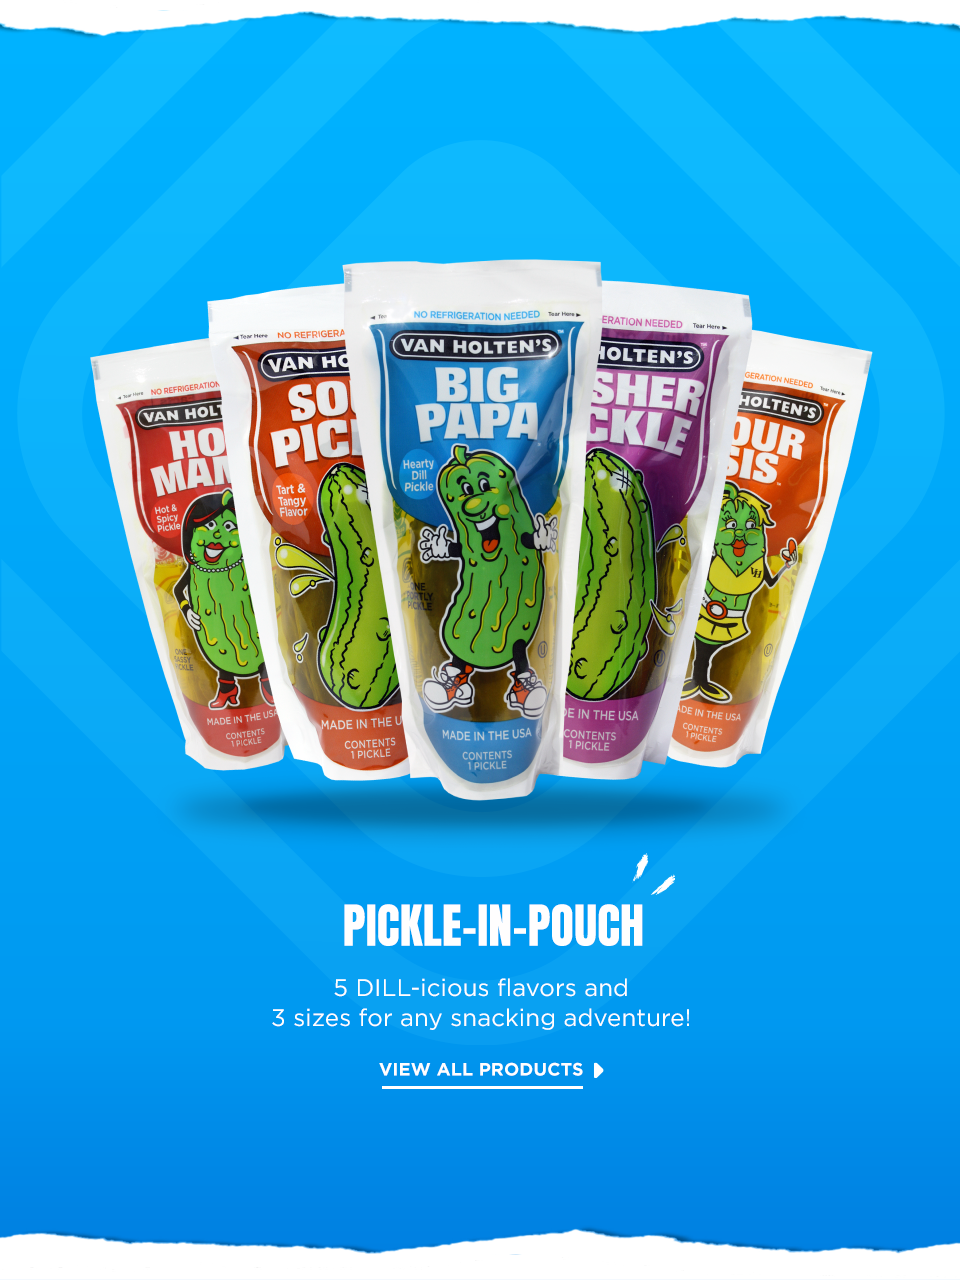 Van Holten's Pickle-In-A-Pouch is better than ever with more extreme flavors to choose from than any other on-the-go pickle brand.